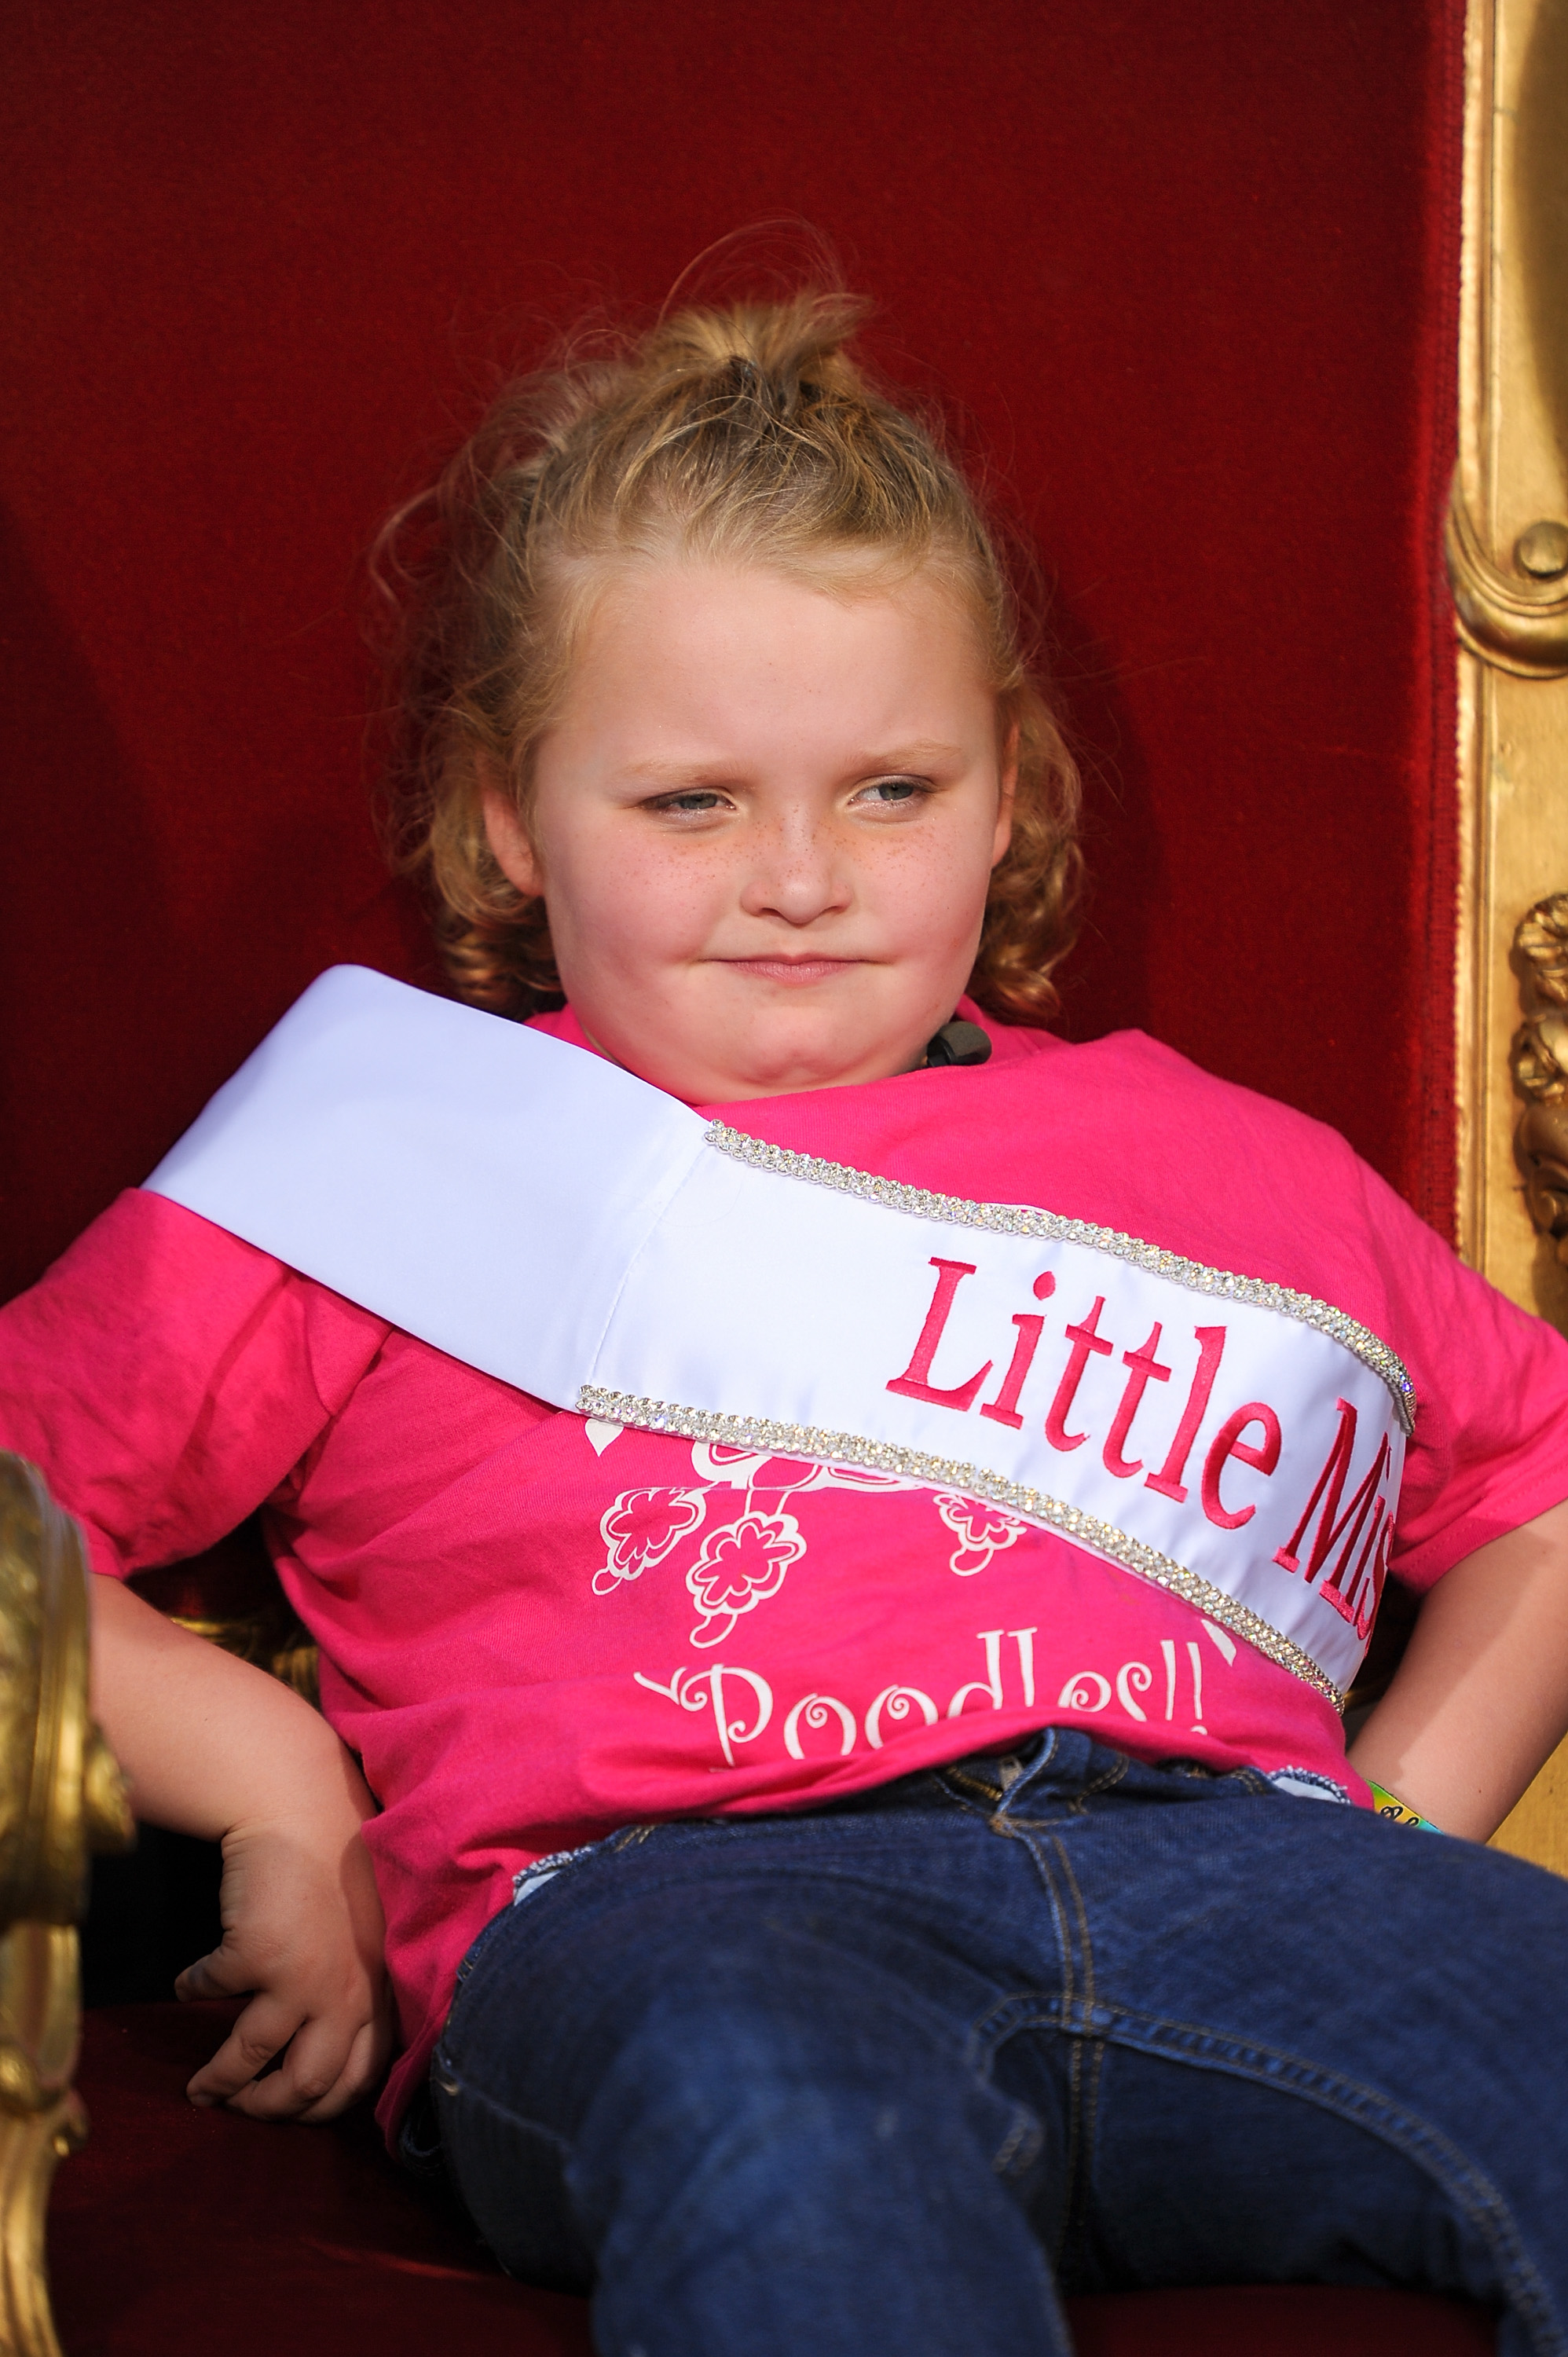 Alana 'Honey Boo Boo' Thompson visiting The Grove in Los Angeles, 2012 | Source: Getty Images